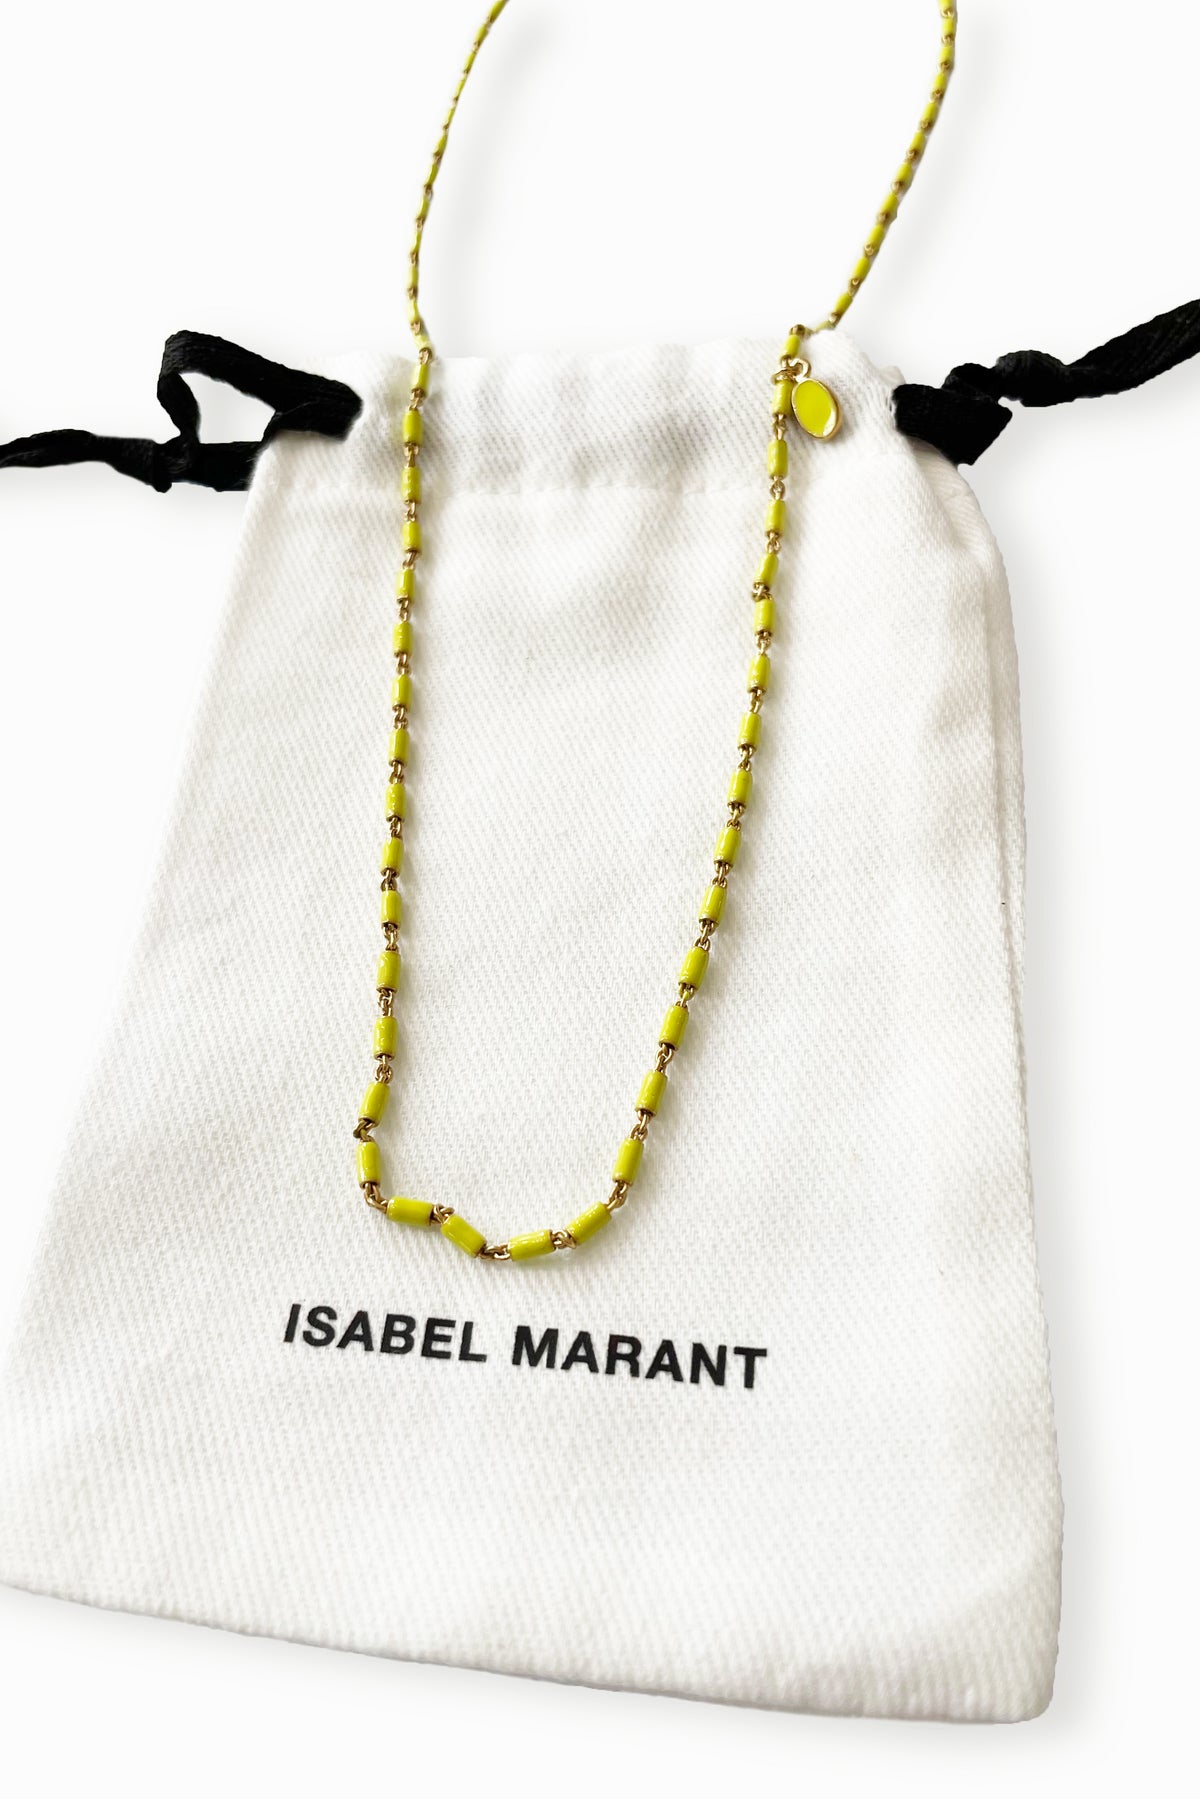 Isabel Marant Casablanca Necklace with Pendant